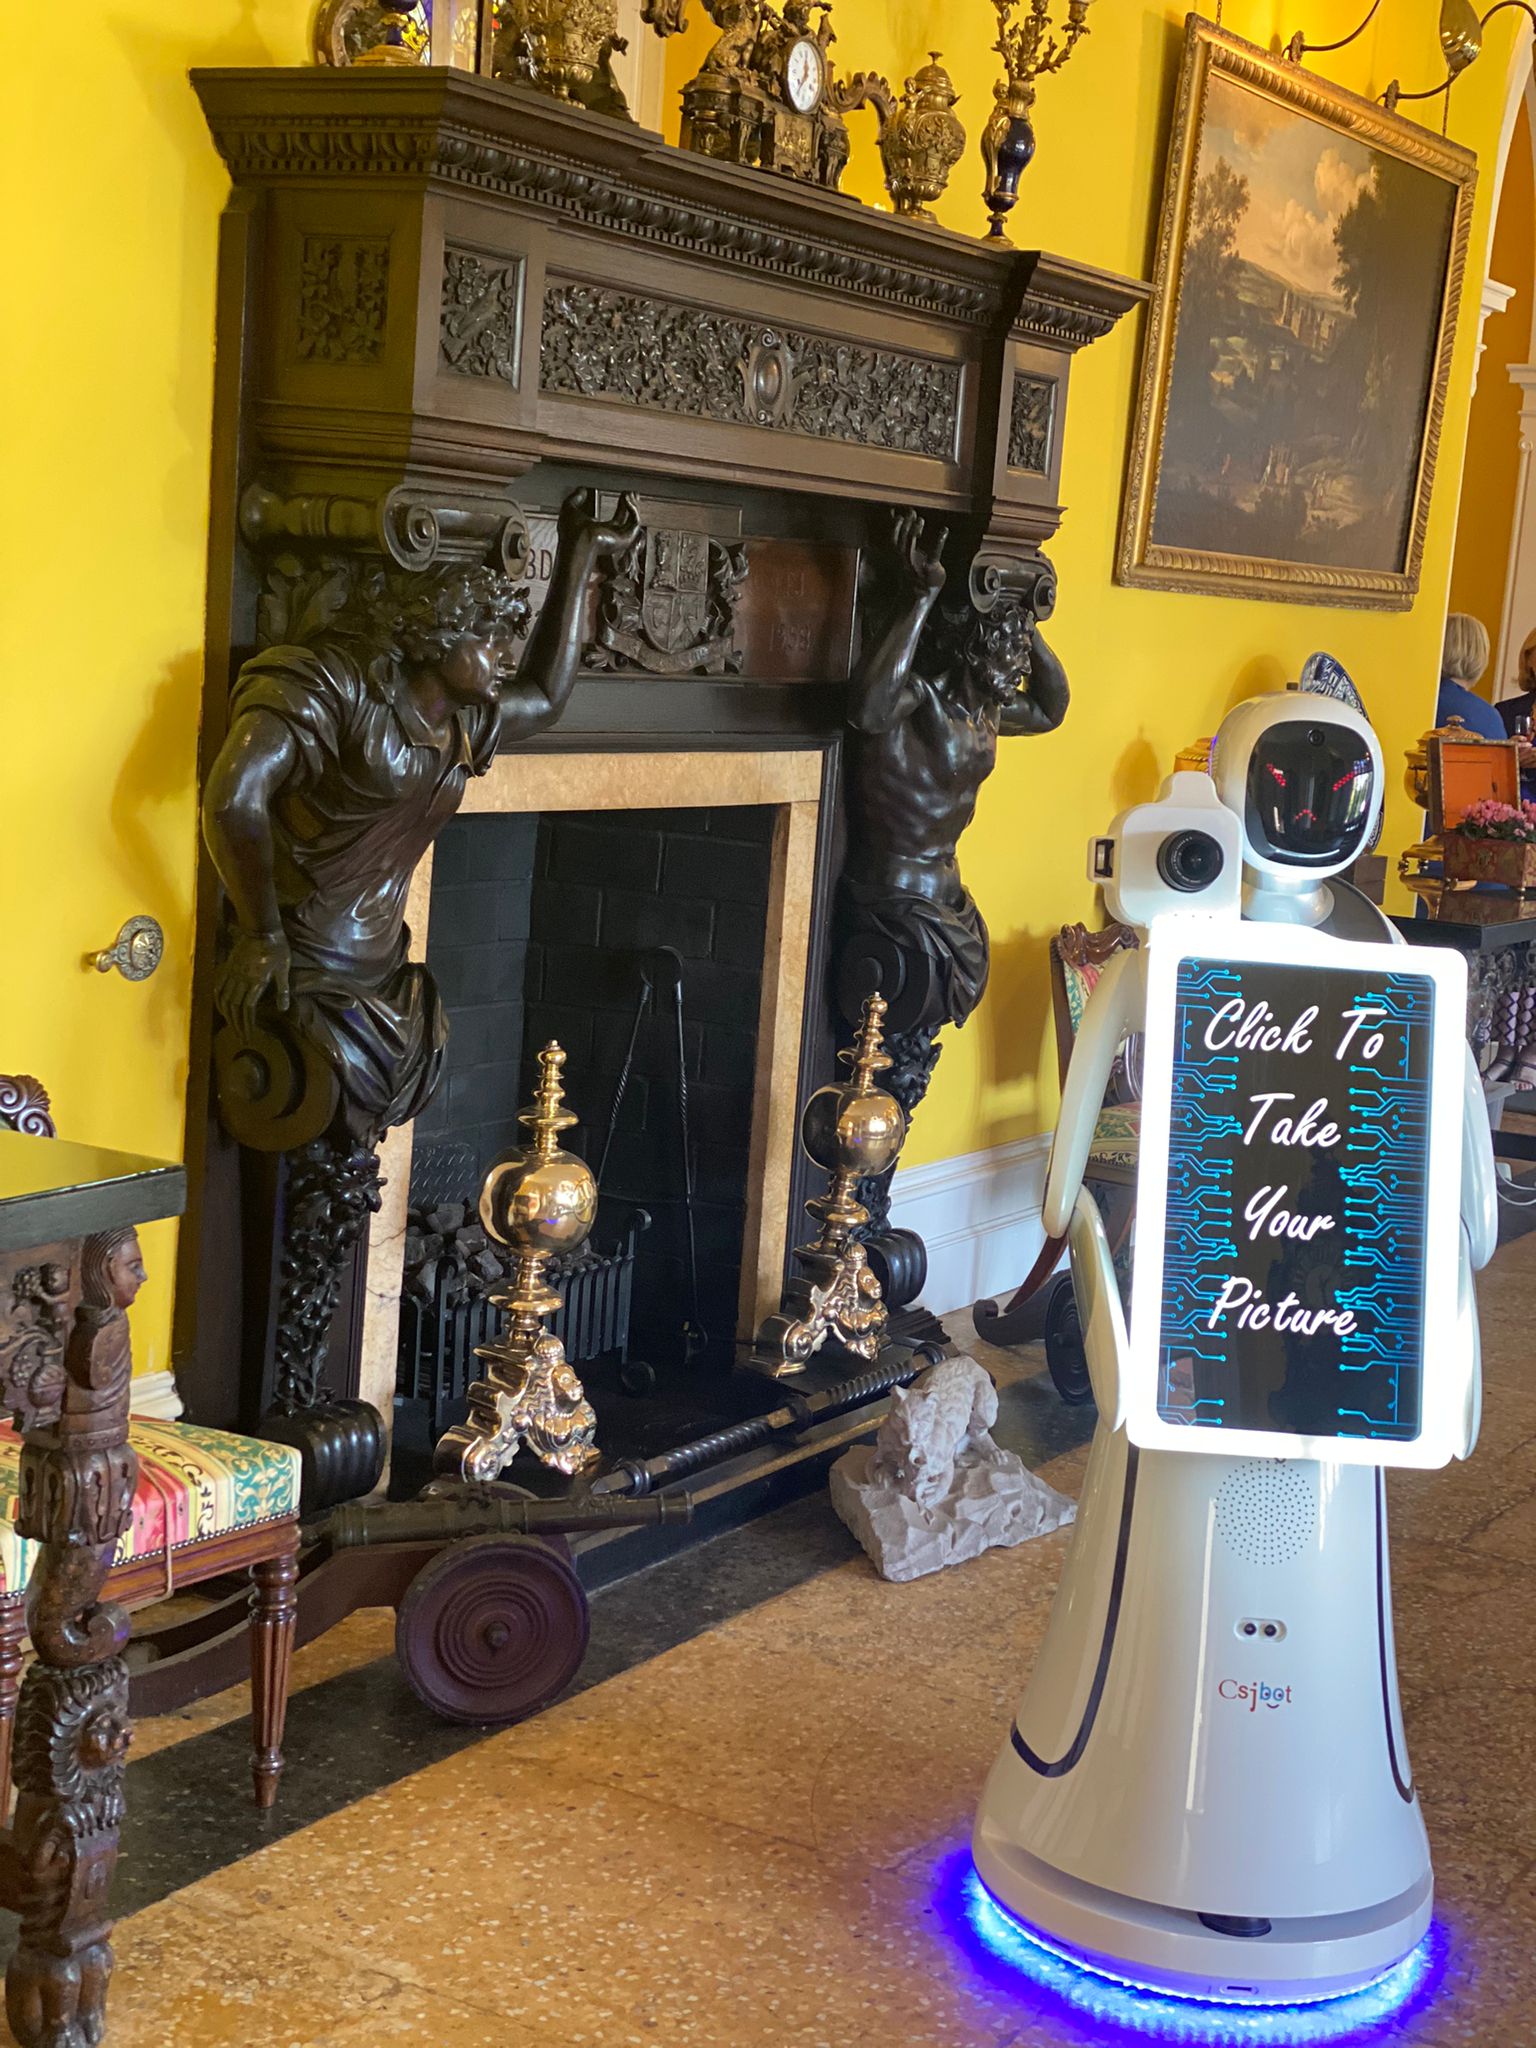 robot photo booth in front of fireplace at event